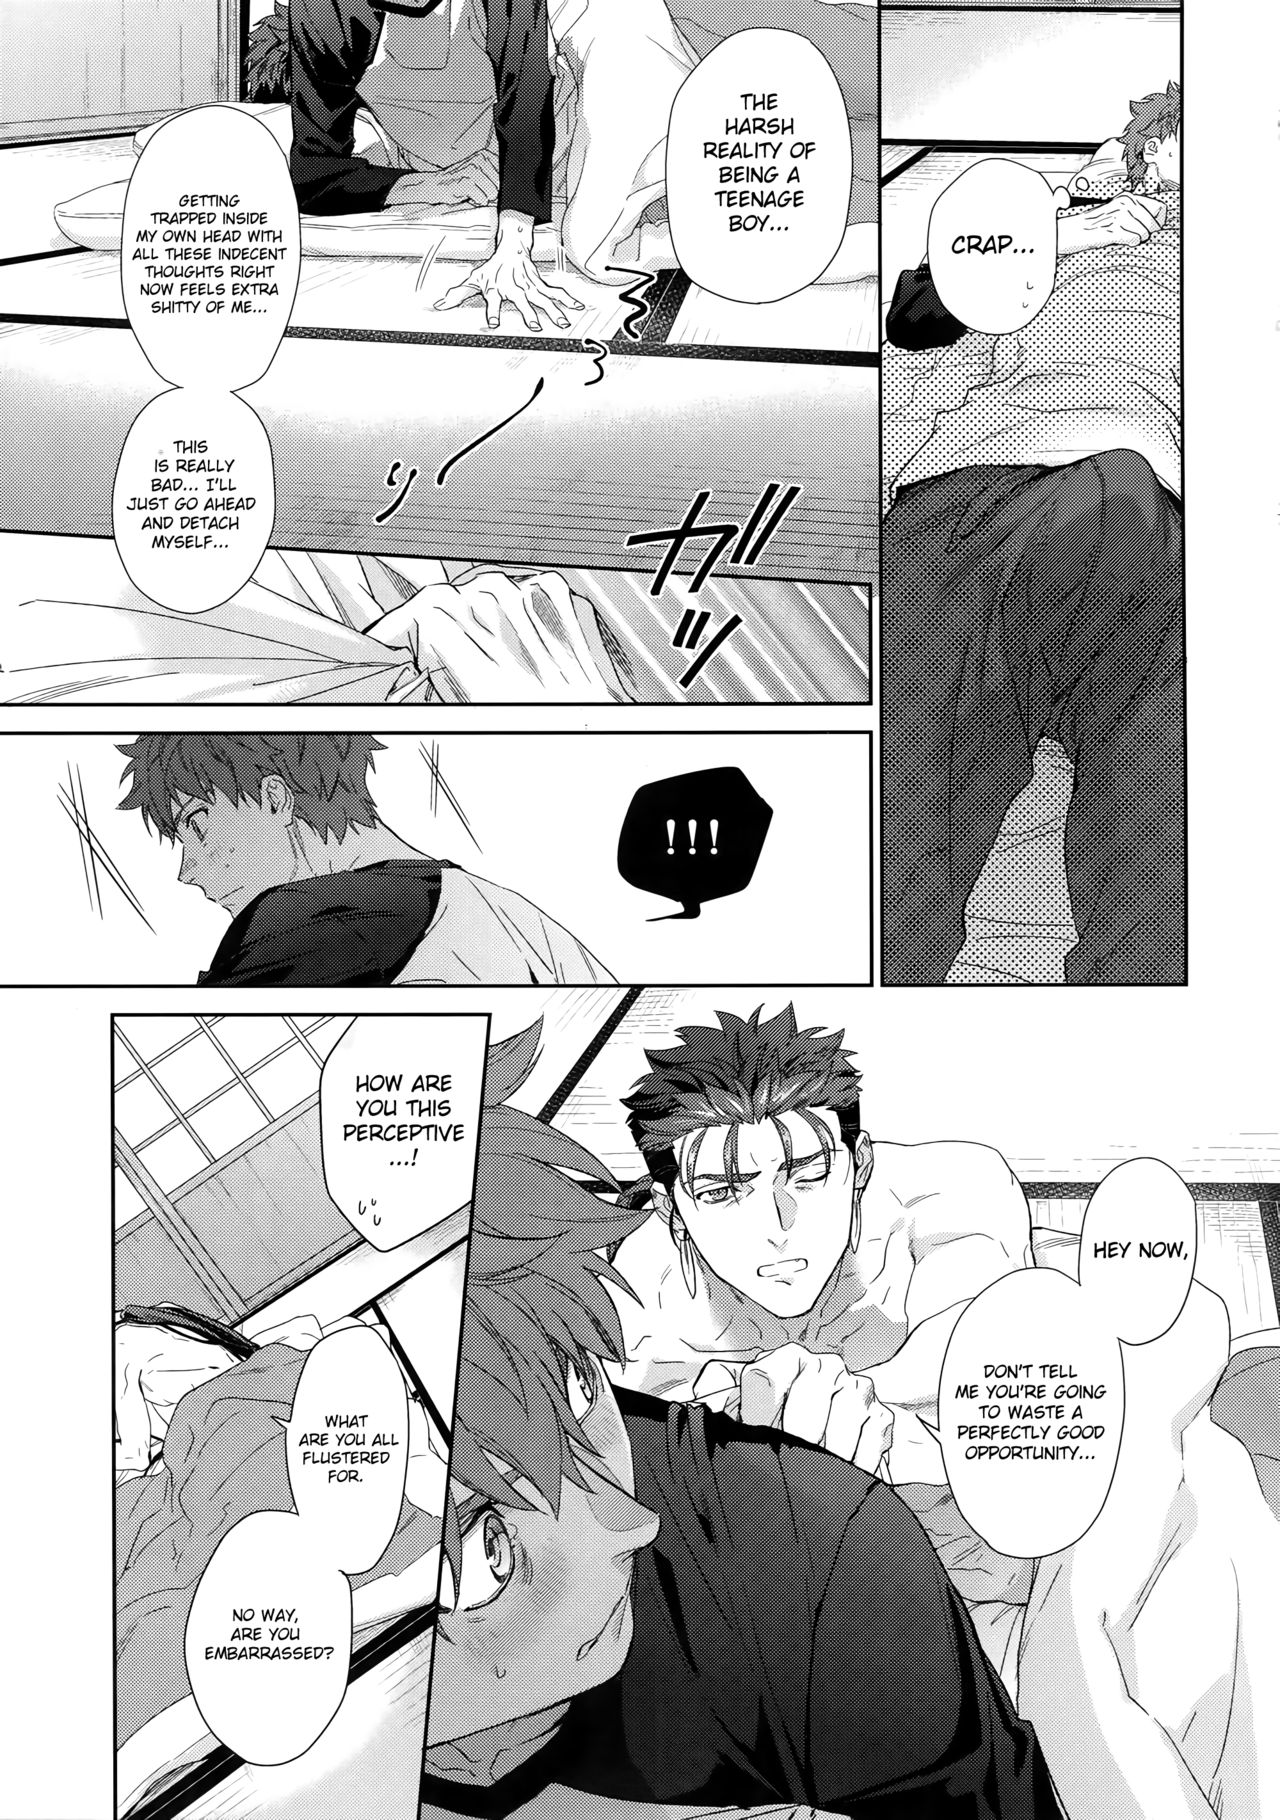 (Dai 23-ji ROOT4to5) [RED (koi)] Melange (Fate/stay night) [English] {GrapeJellyScans} [Decensored] page 16 full